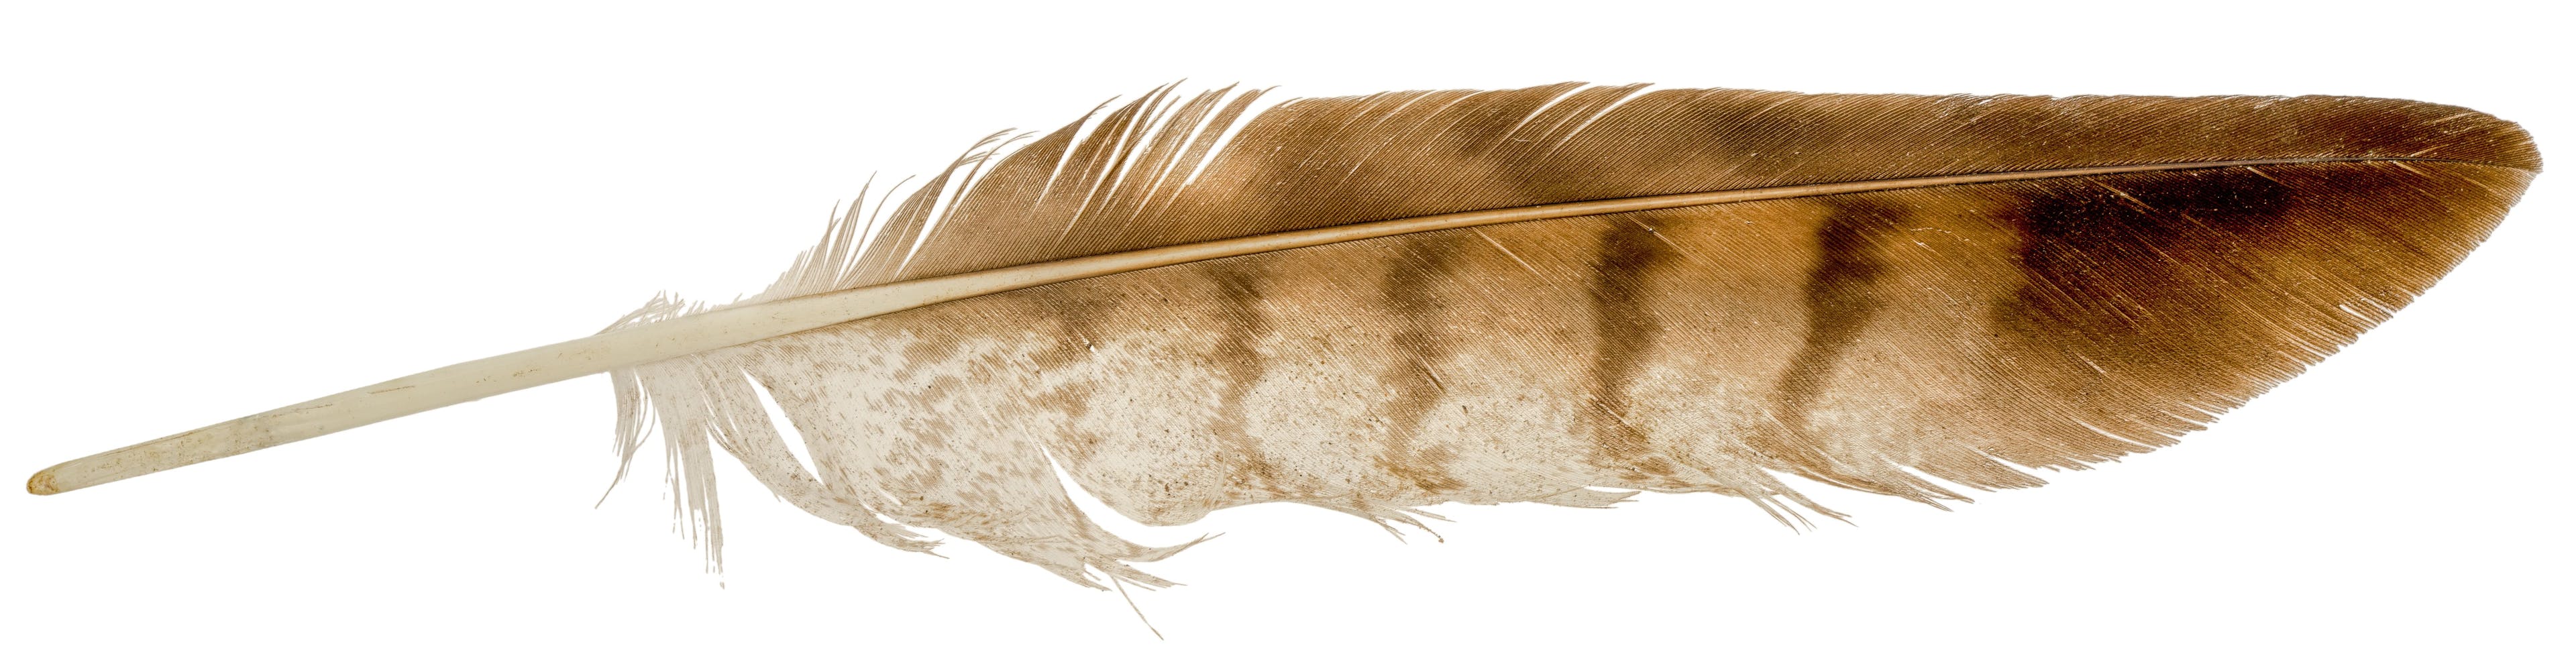 Falcon feather isolated on white background. | Image Credit: © elen31 - stock.adobe.com